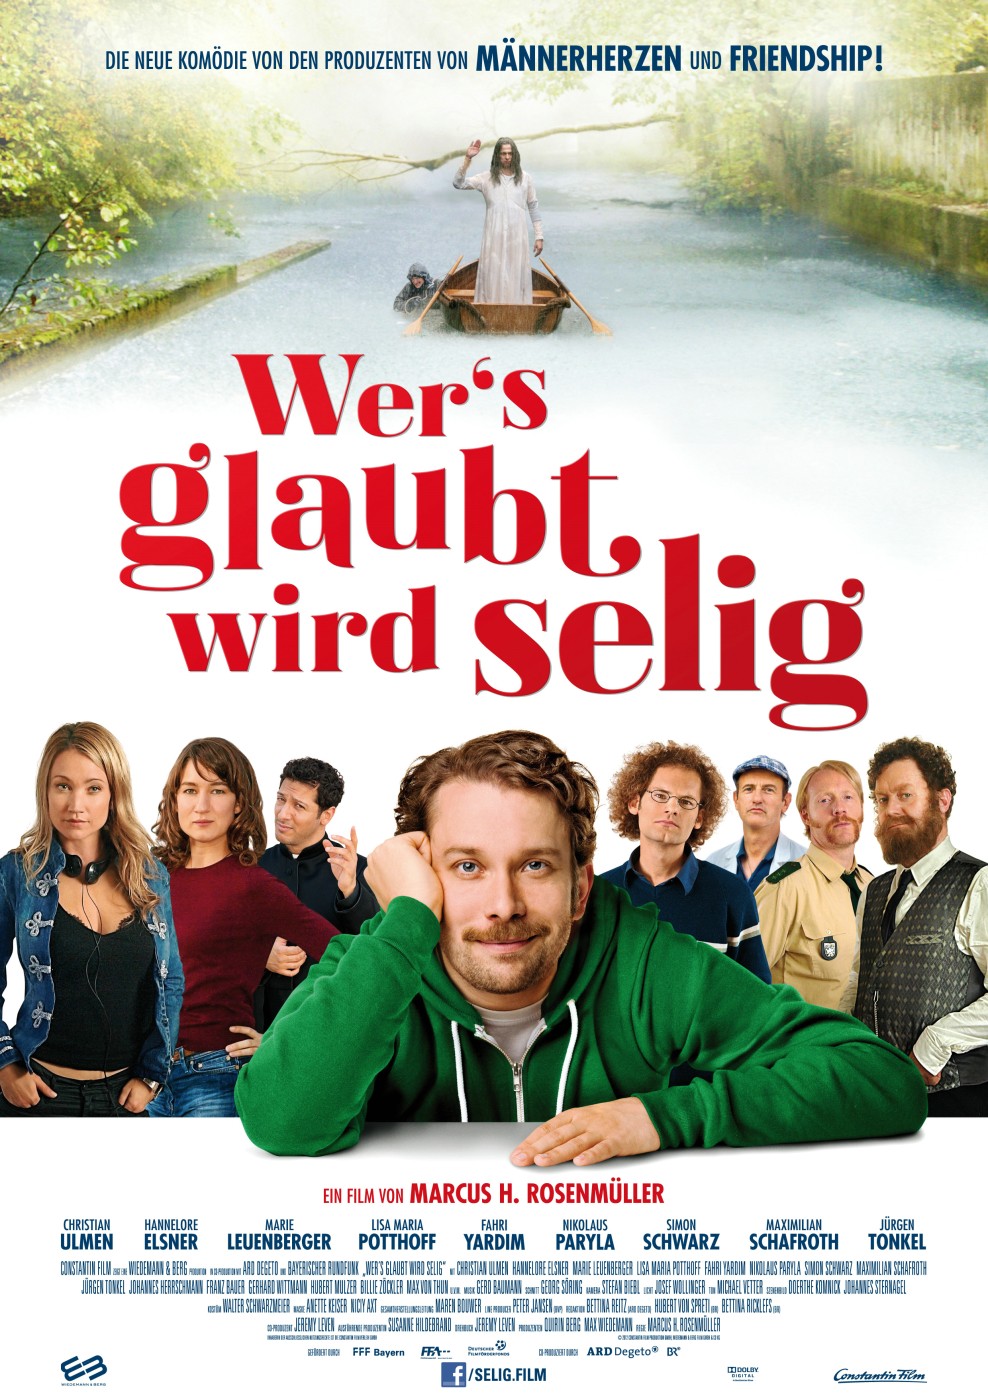 Extra Large Movie Poster Image for Wer's glaubt, wird selig 